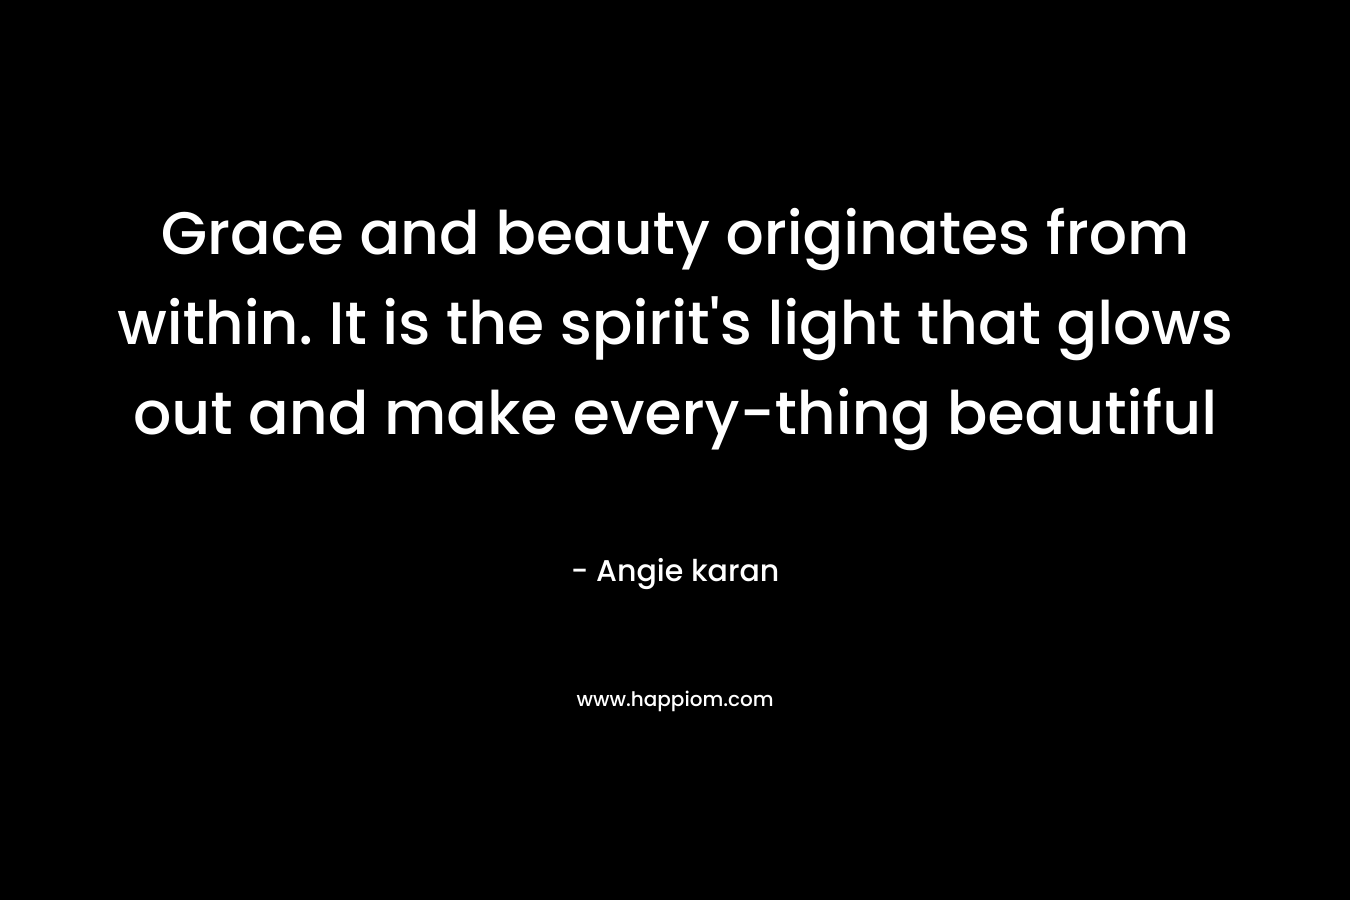 Grace and beauty originates from within. It is the spirit's light that glows out and make every-thing beautiful